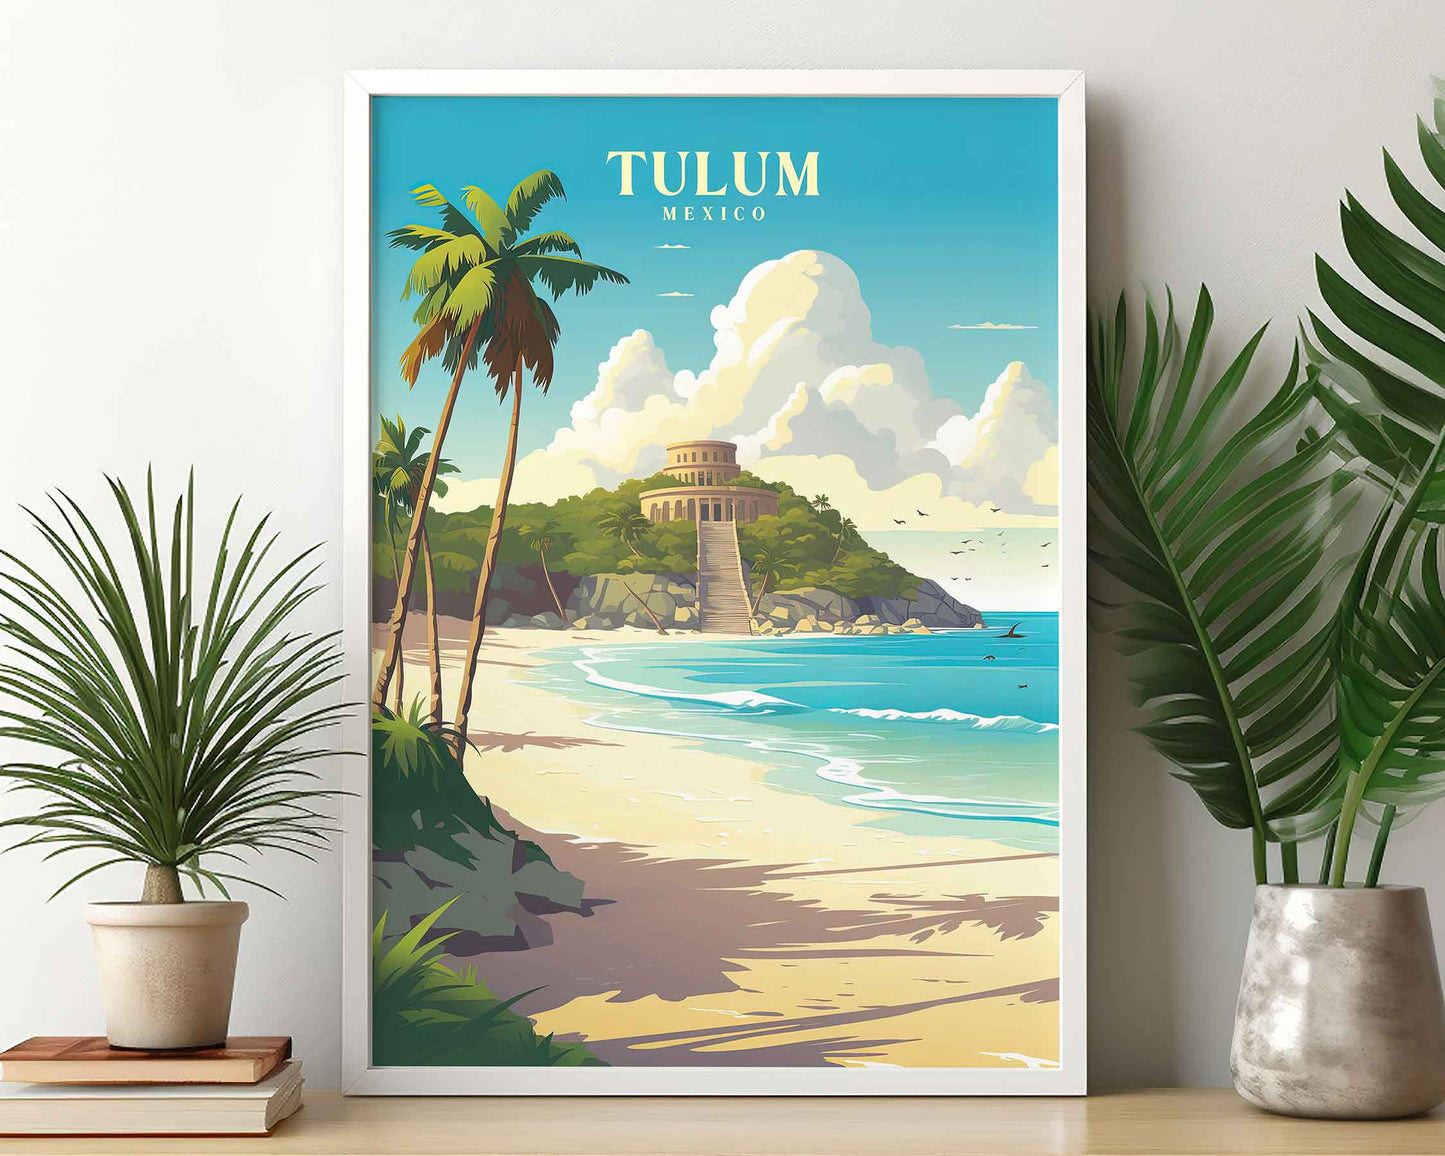 Framed Image of Tulum Mexico Travel Print Tourism Wall Art Poster Illustration